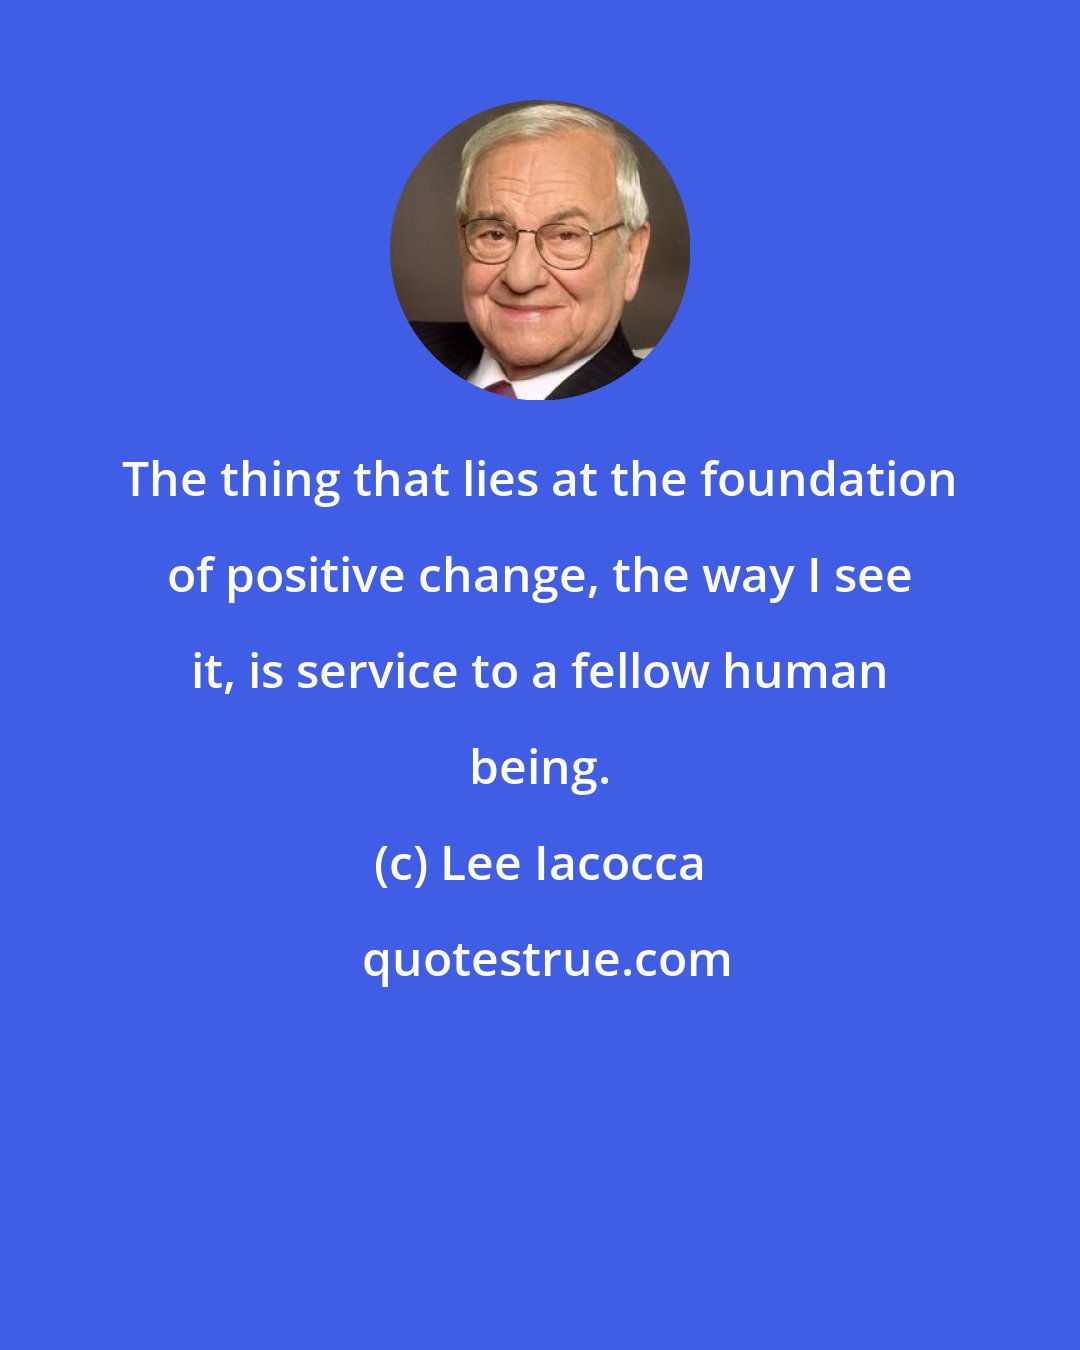 Lee Iacocca: The thing that lies at the foundation of positive change, the way I see it, is service to a fellow human being.